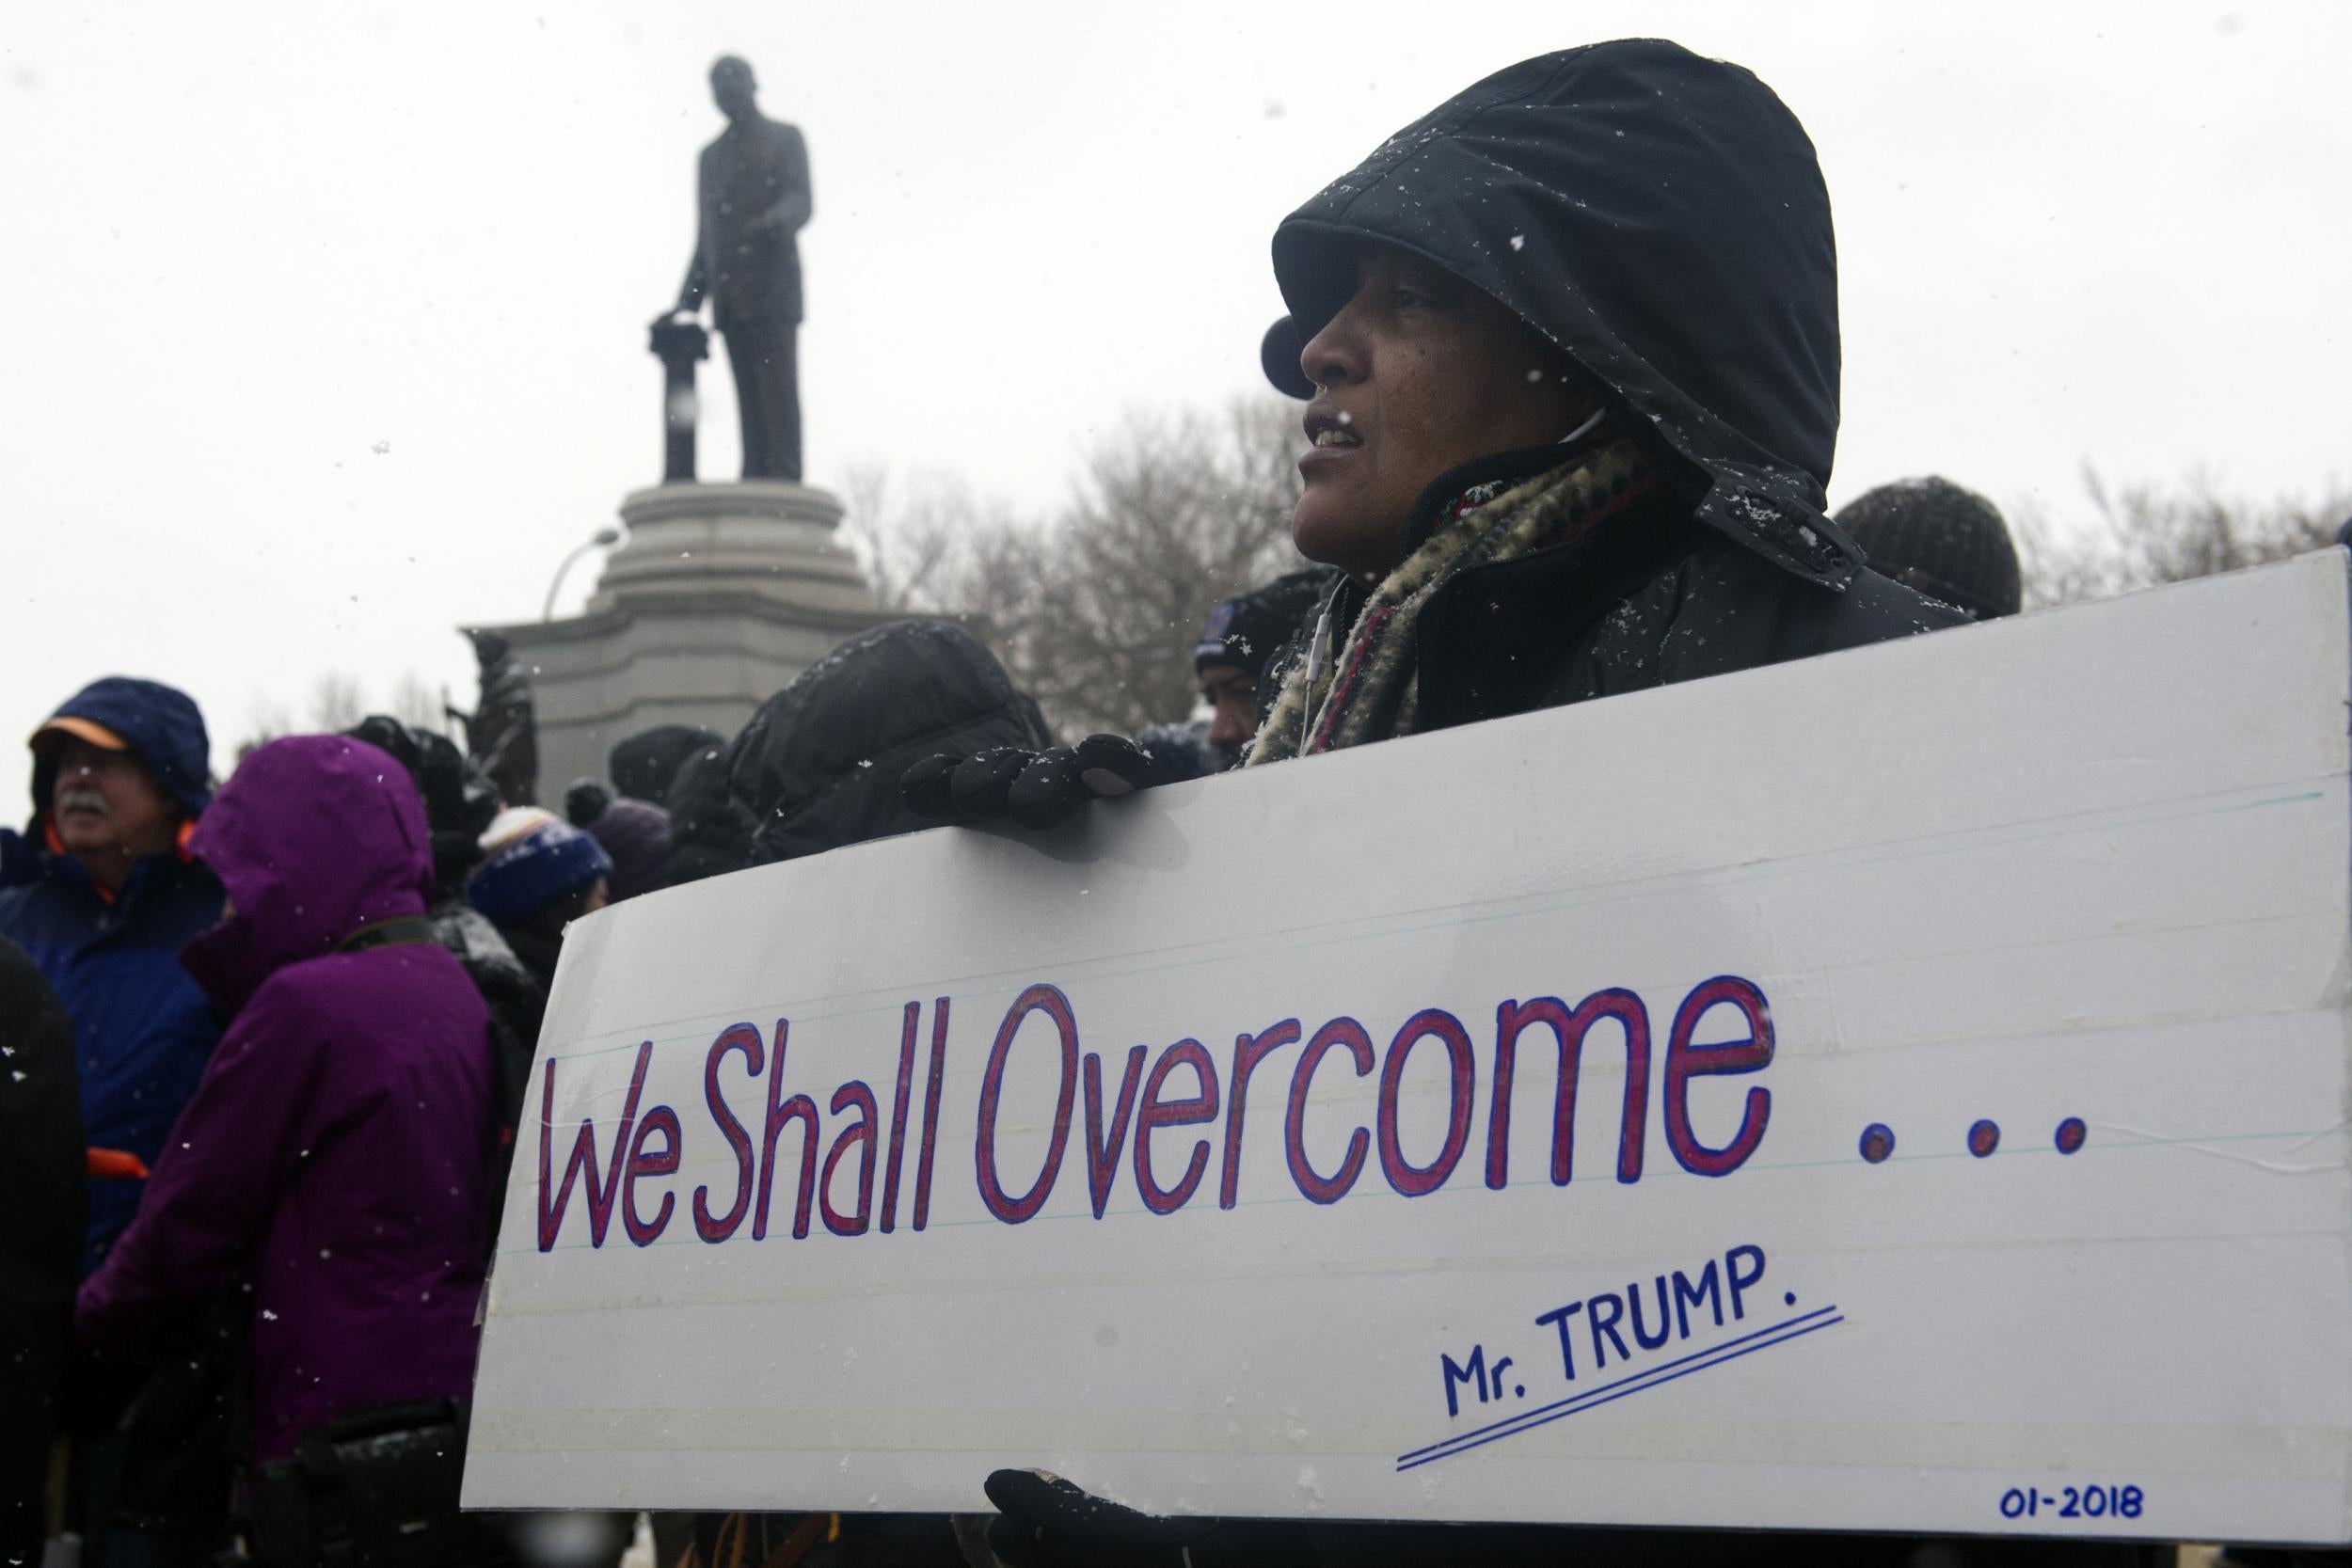 Lesa Webb of Los Angeles, California, holds up a sign before marching in the 32nd Annual Martin Luther King, Jr march and parade in Denver, Colorado